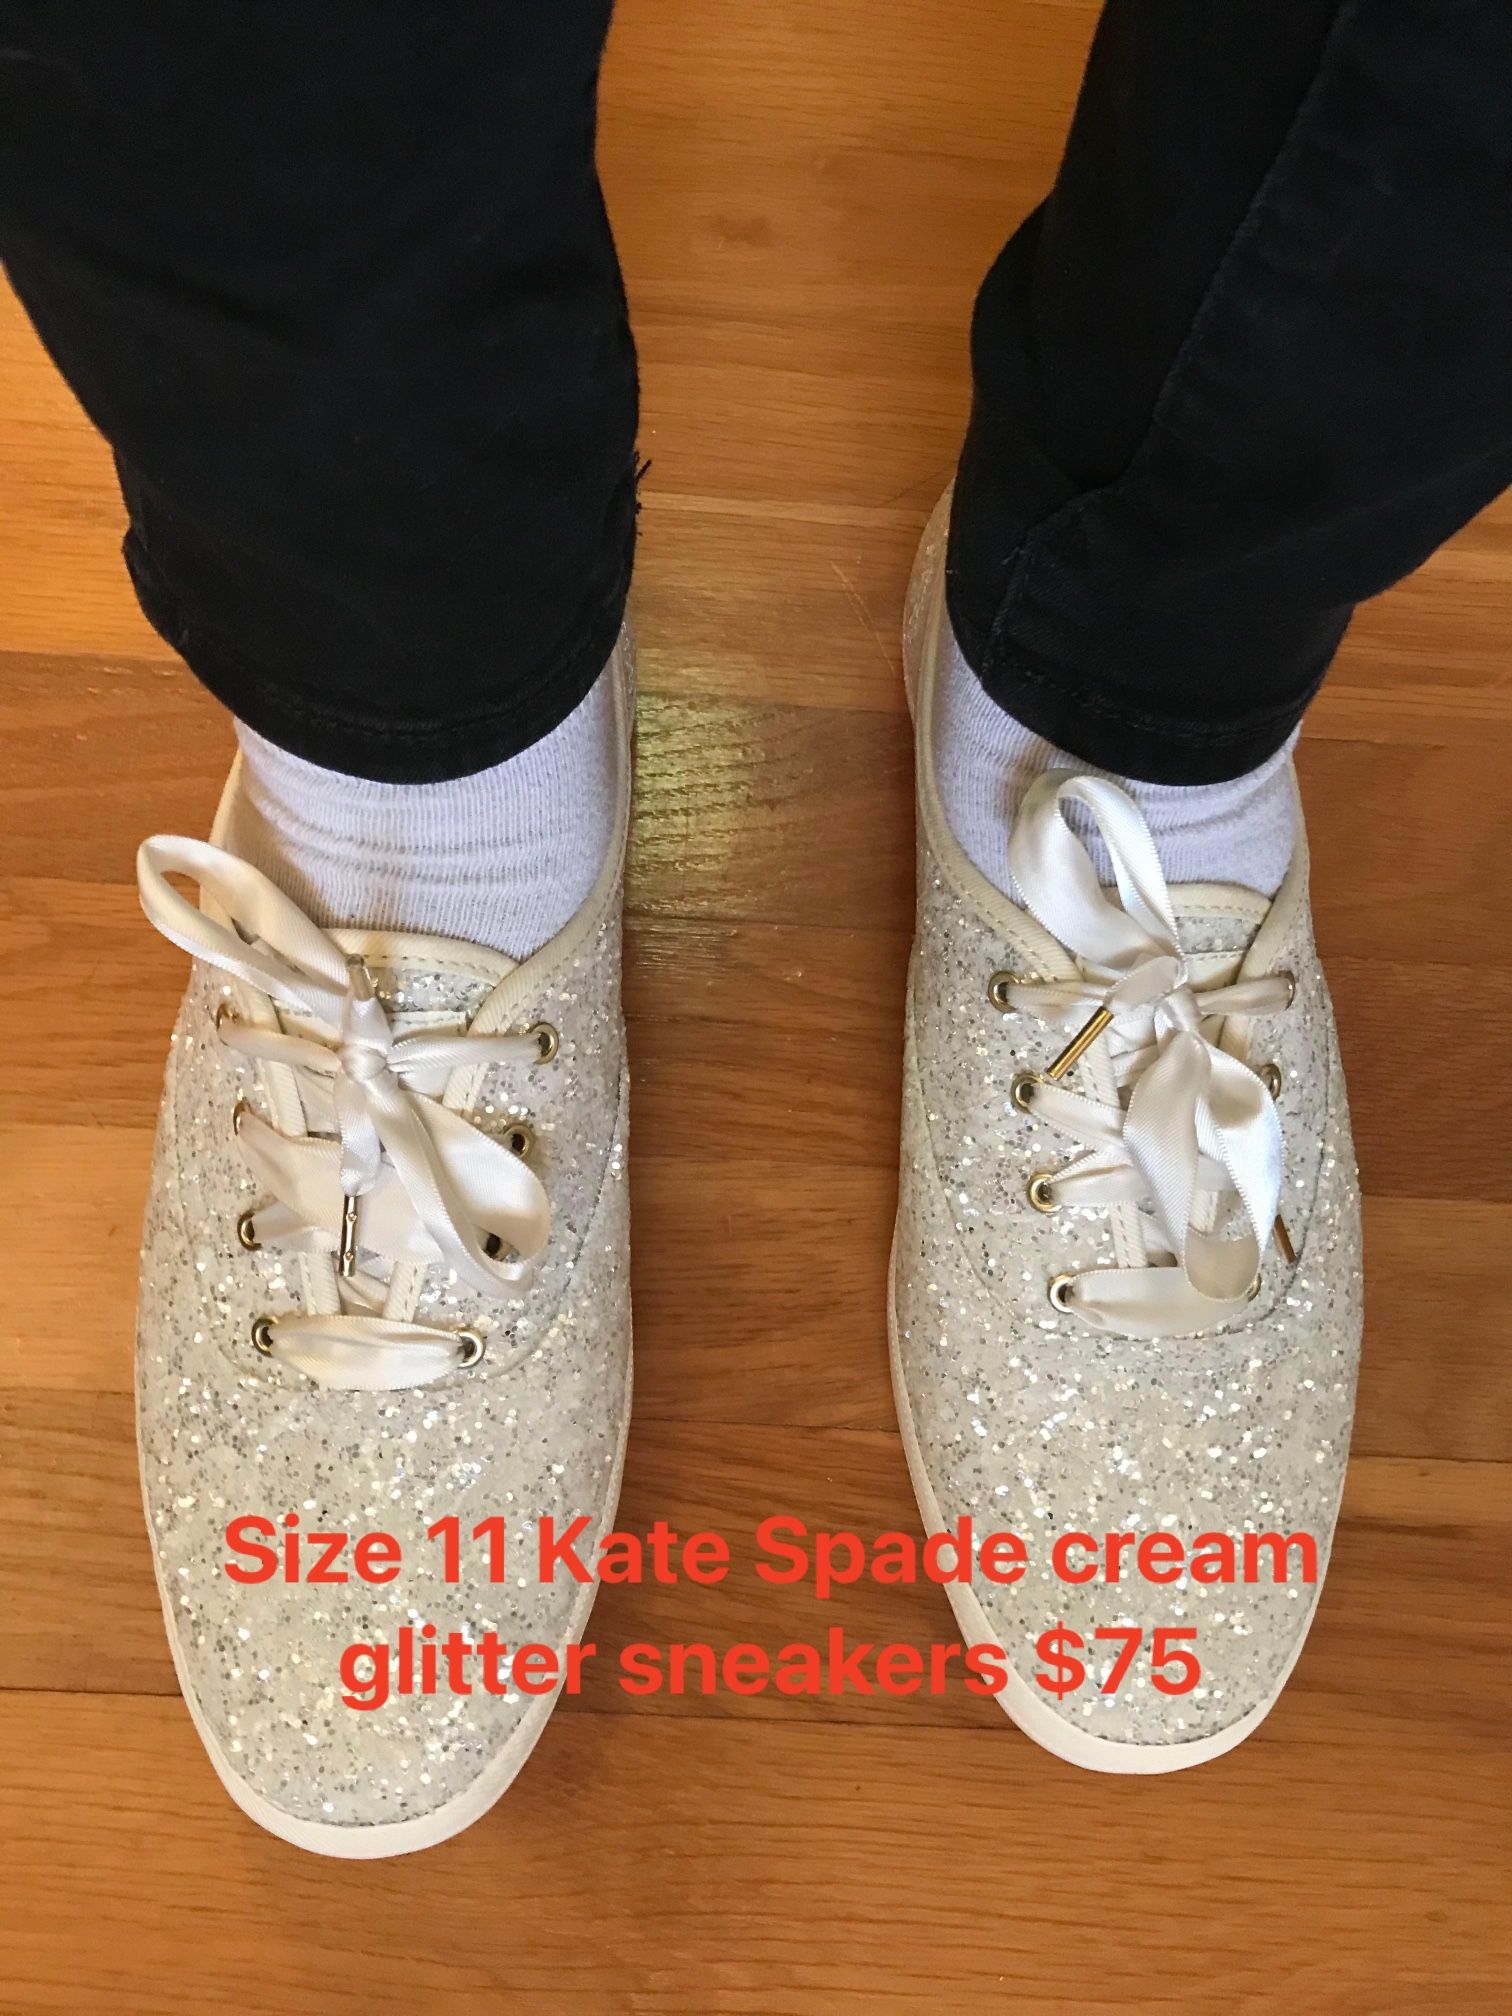 Kate Spade Glitter Cream Color Keds Size 11 Wedding Sneakers for Sale in  East Islip, NY - OfferUp